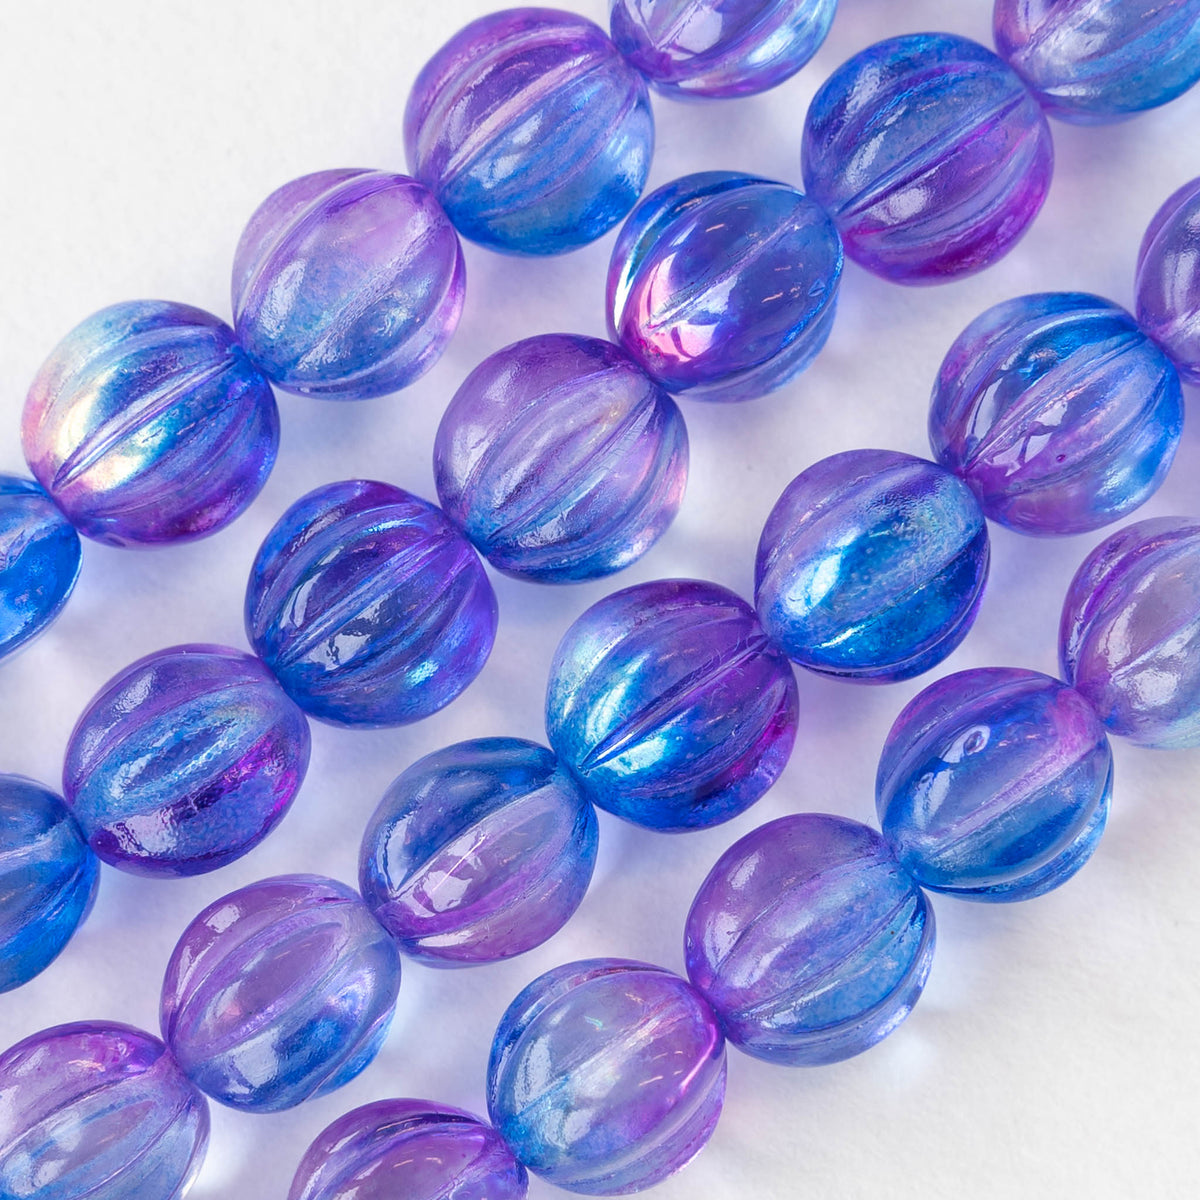 4 Small Blue and Purple Ombre Flower Beads, 18mm, 1 Hole Center Drille